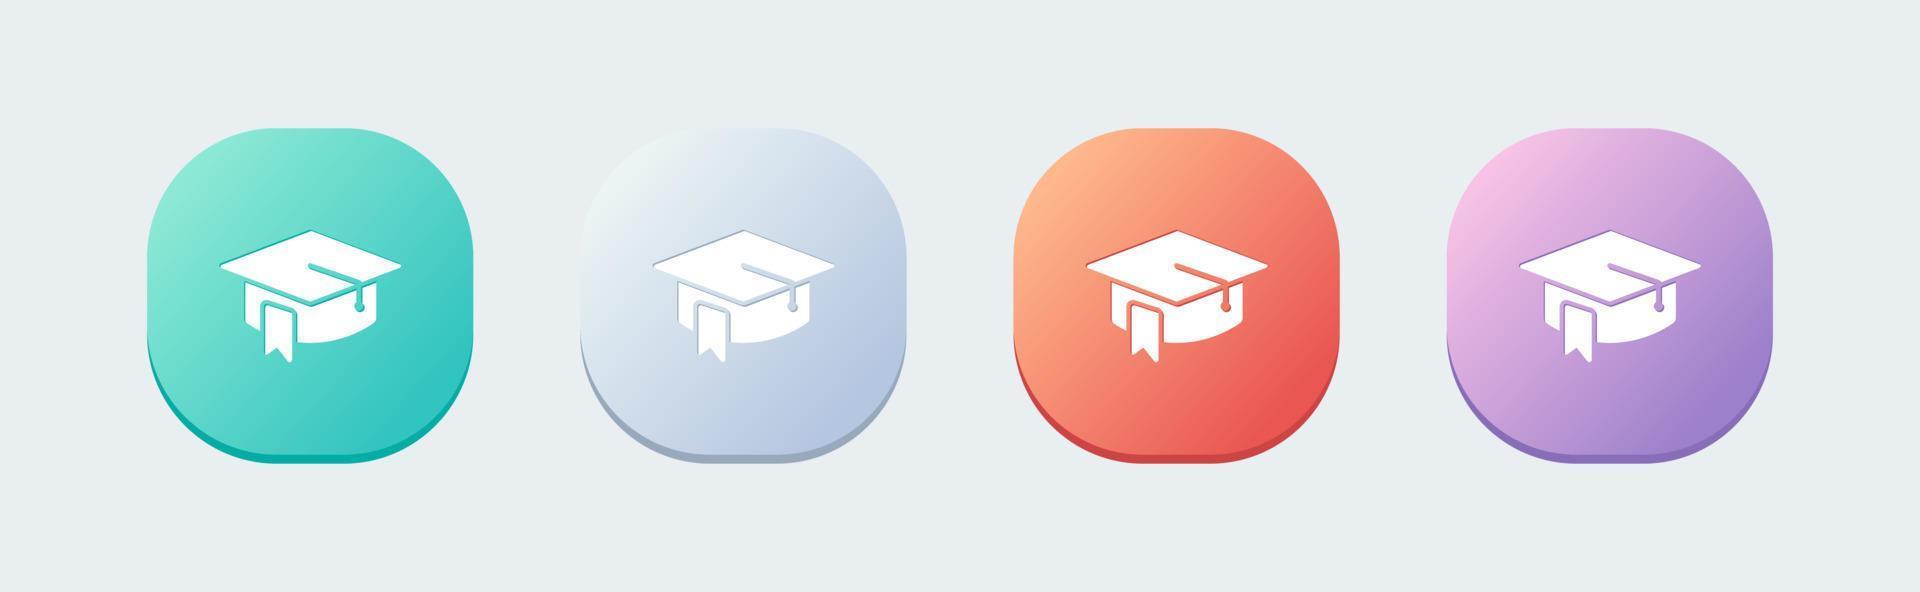 Graduation solid icon in flat design style. Education signs vector illustration.